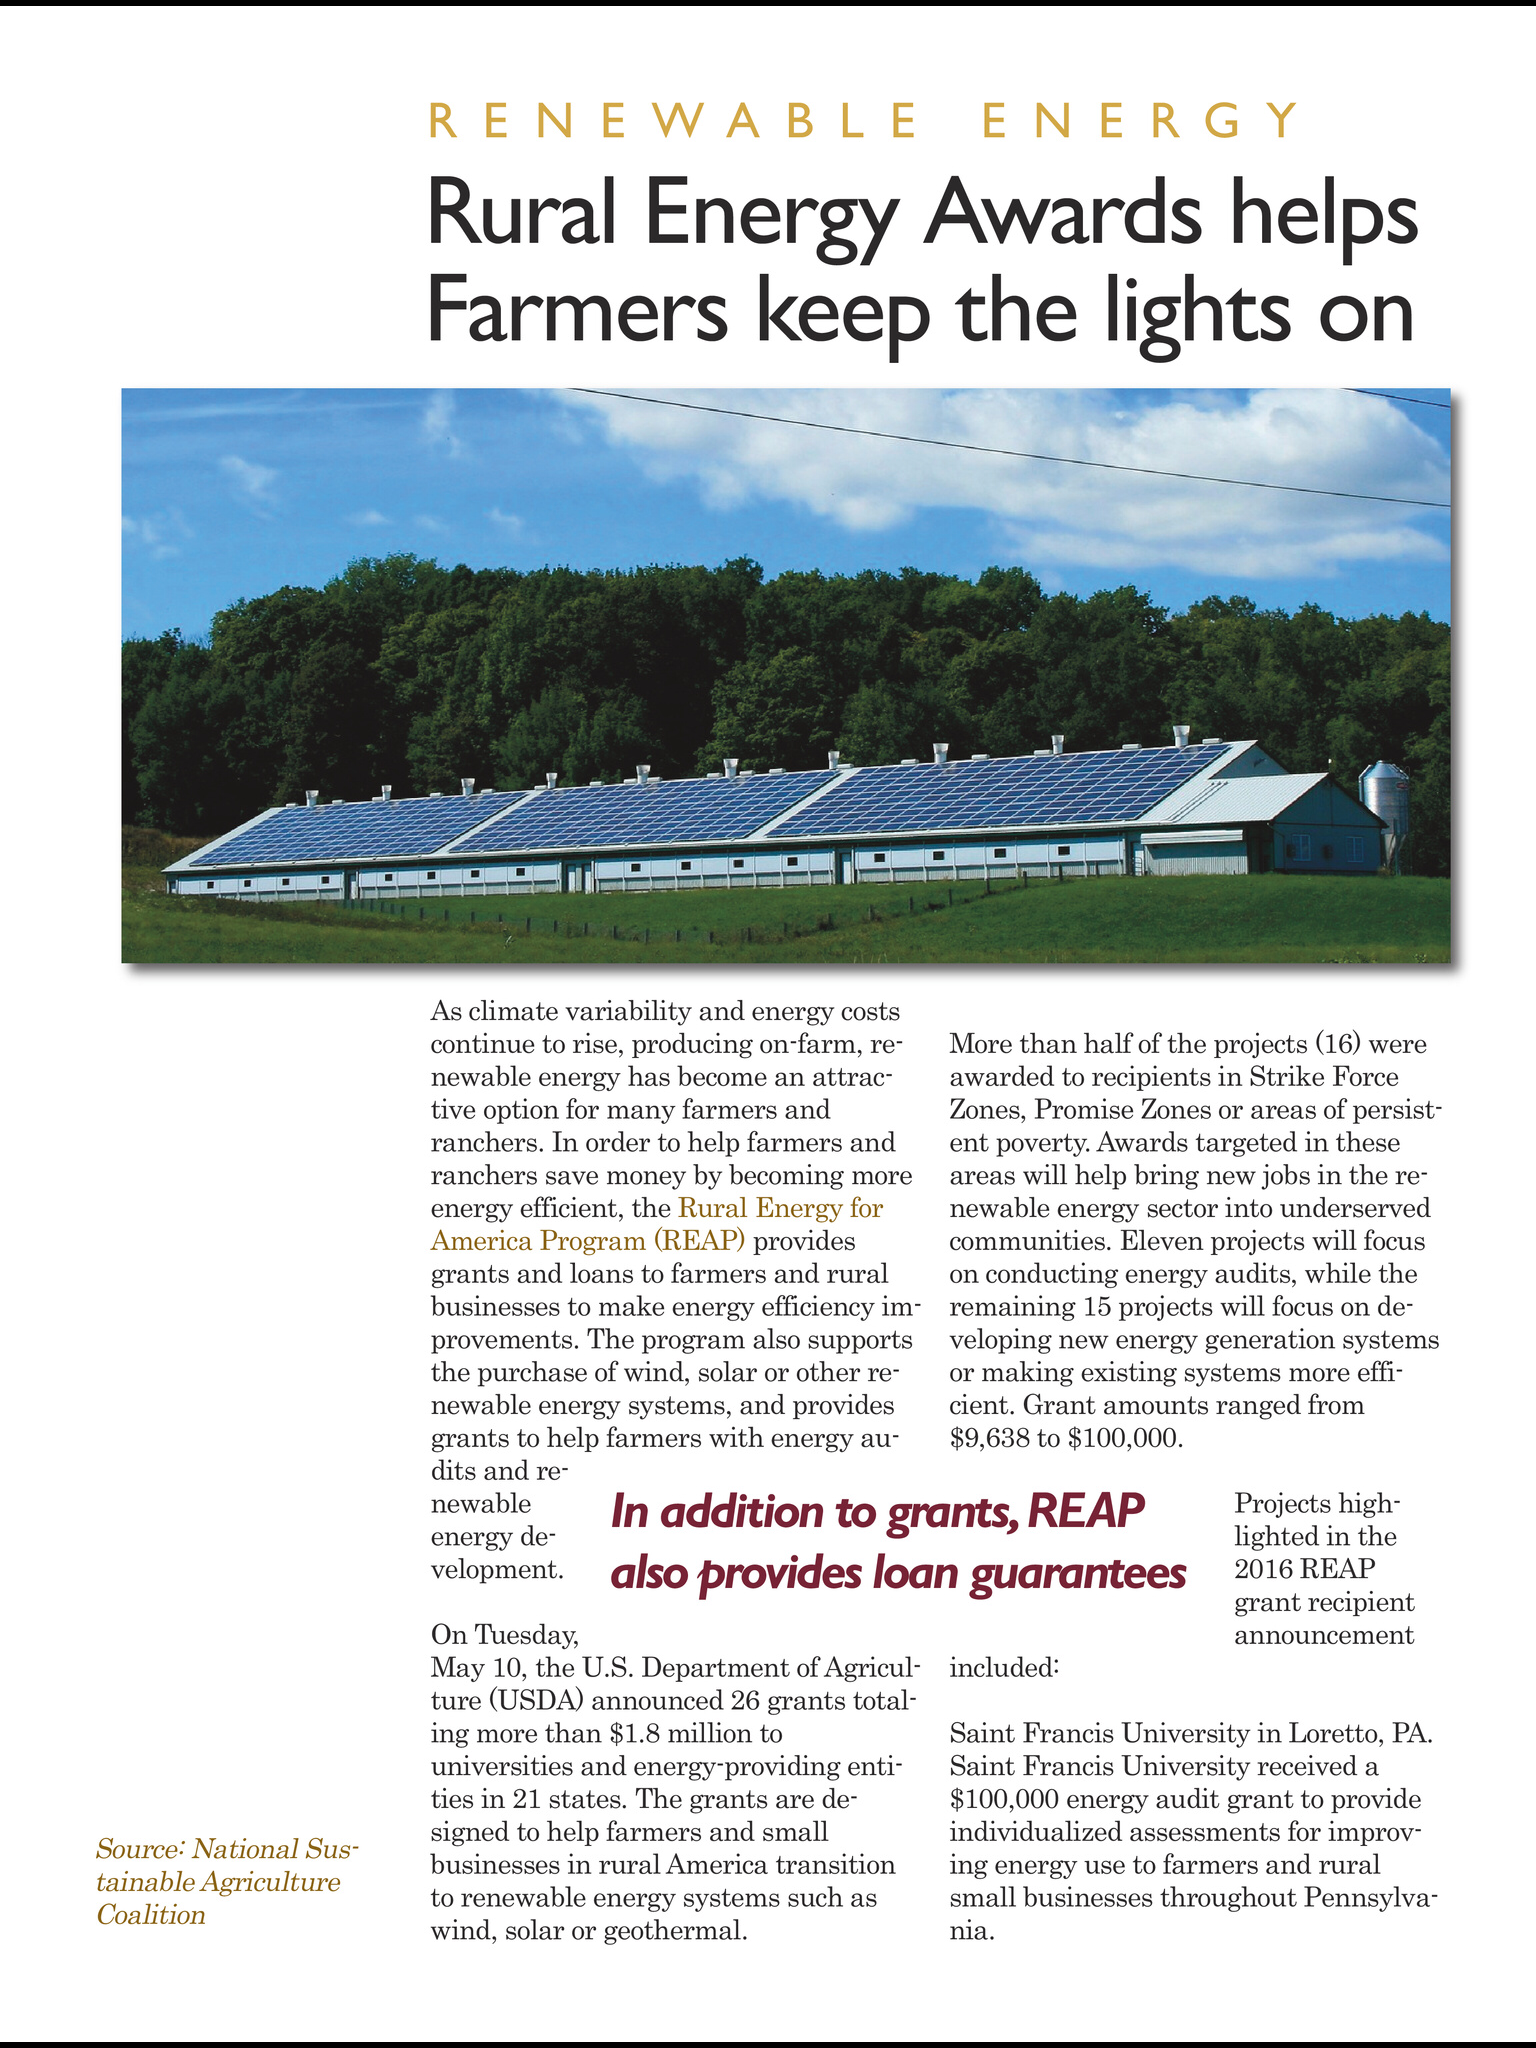 Rural energy awards available for farmers in the US